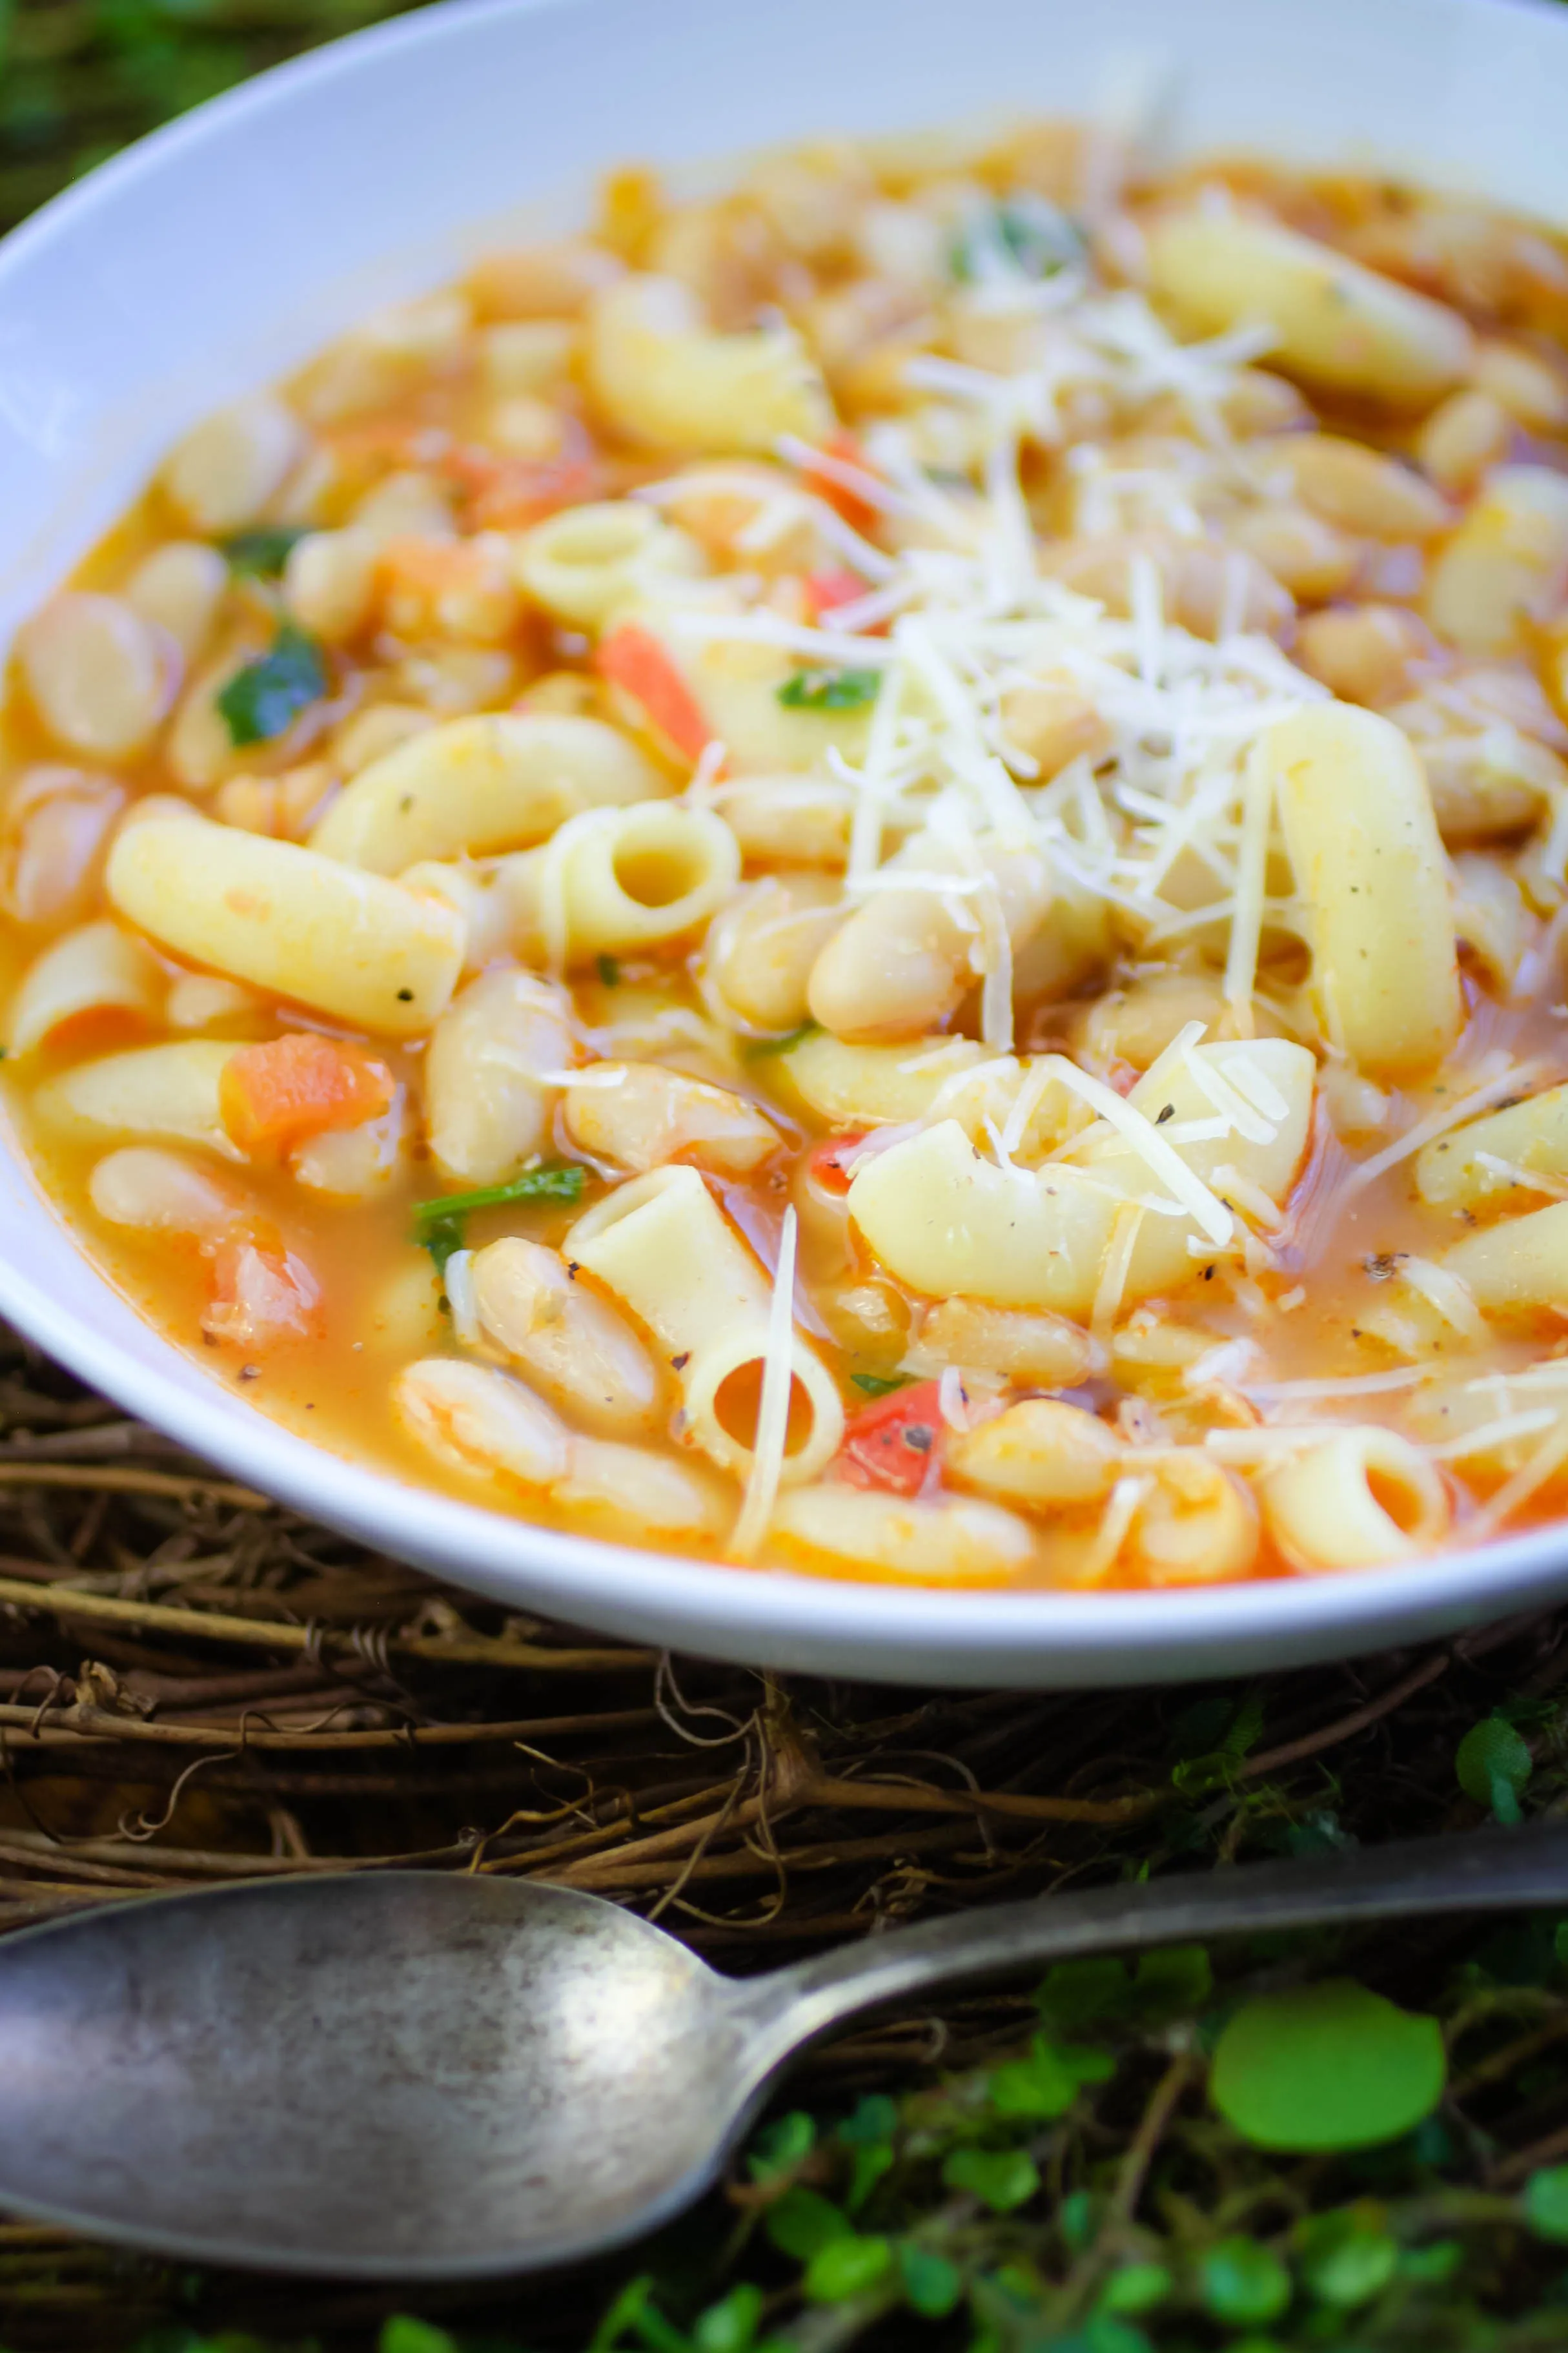 Pasta e Fagioli (Pasta and Beans) is a hearty dish that's perfect on a cold day. Enjoy Pasta e Fagioli (Pasta and Beans) any night of the week!